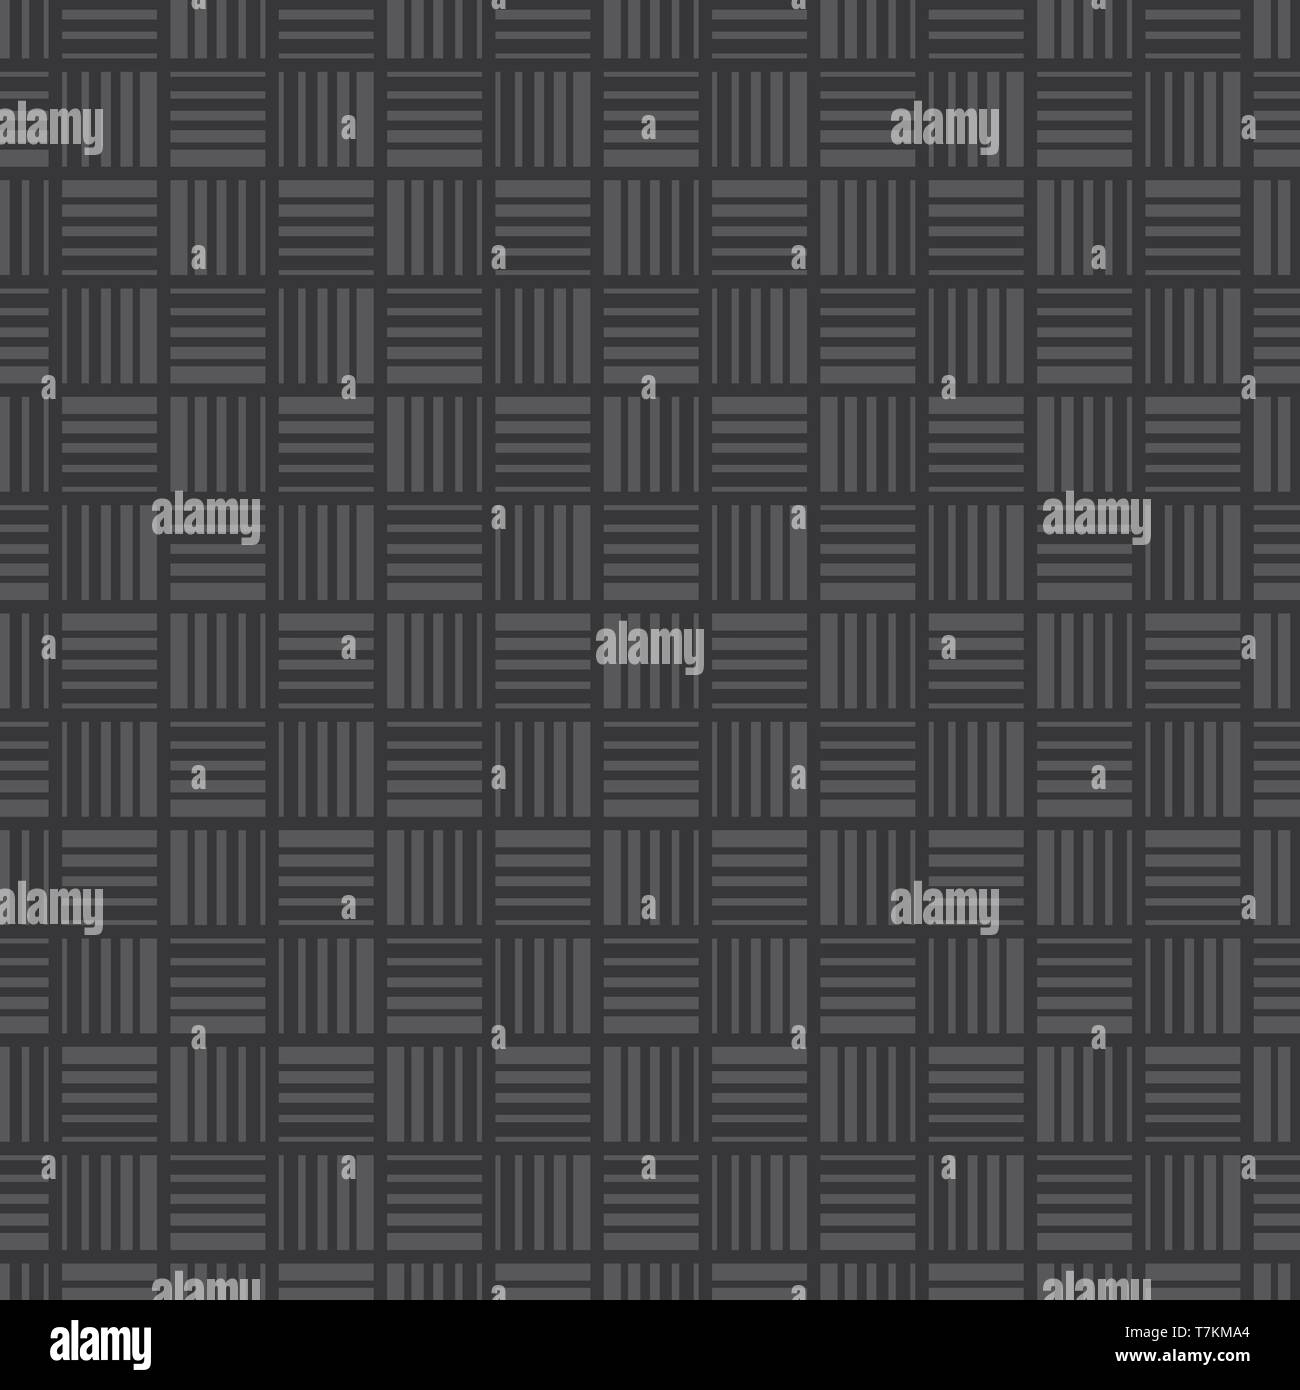 Seamless dark gray squares with stripes pattern vector. Stock Vector